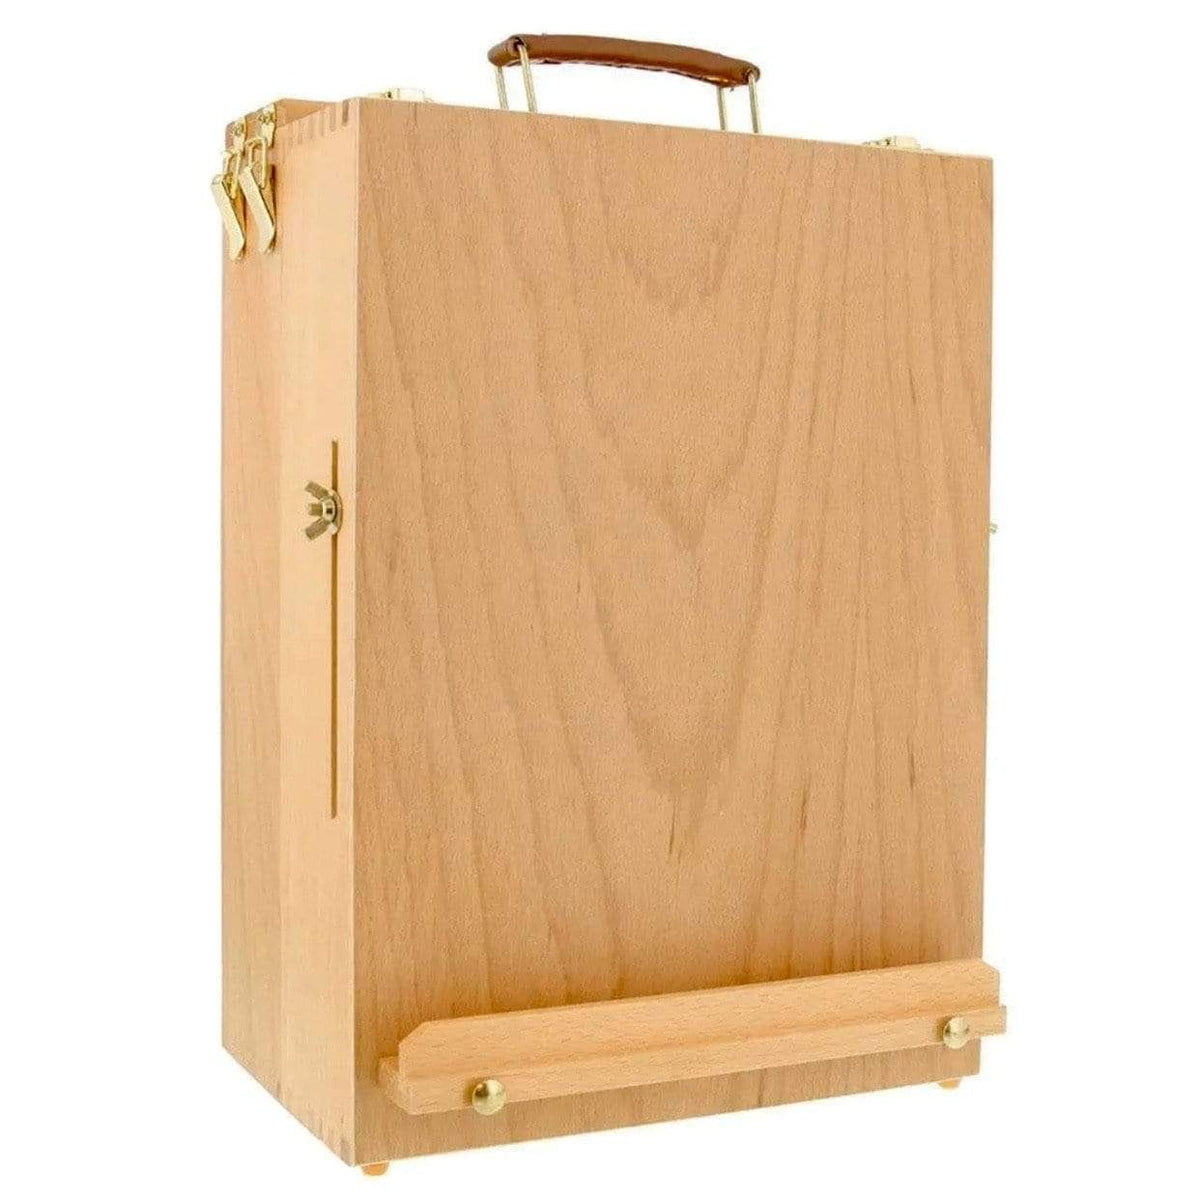 Atworth French Easel for Painting Deluxe Oak Wooden Field Studio Sketch Box